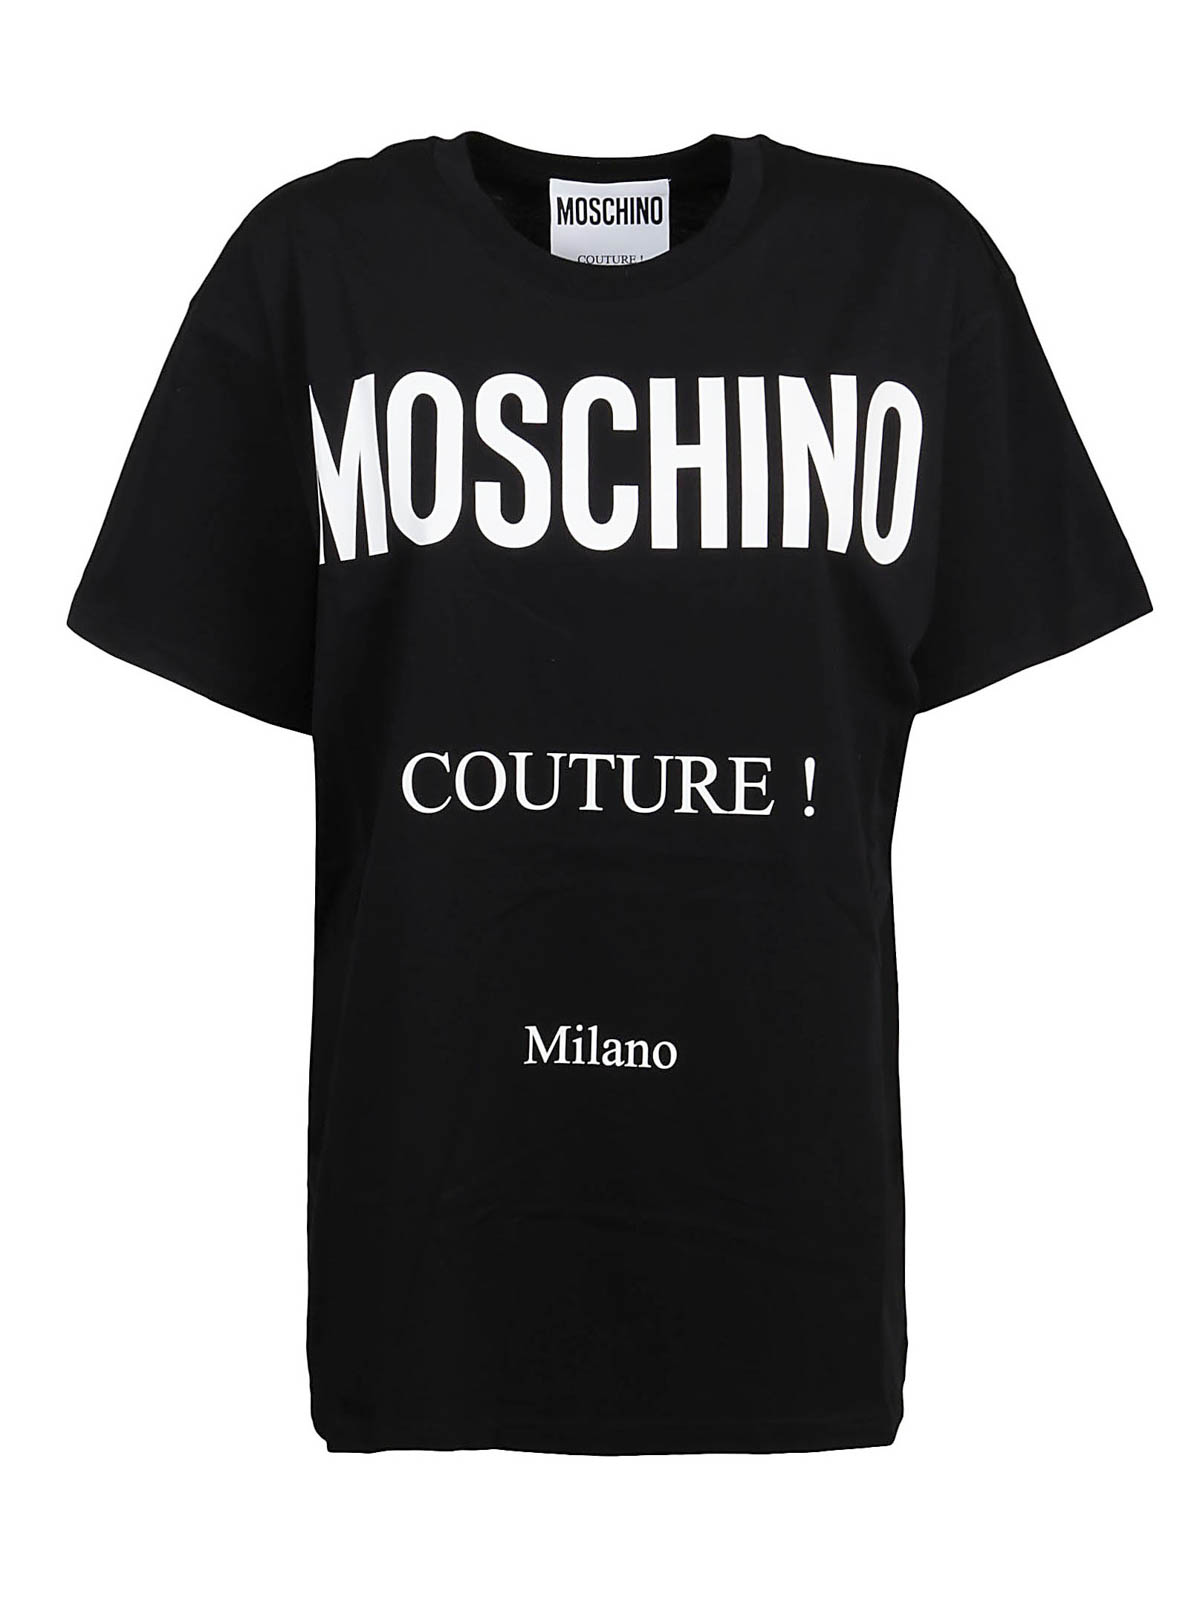 moschino couture t-shirt Off 71% - www.loverethymno.com